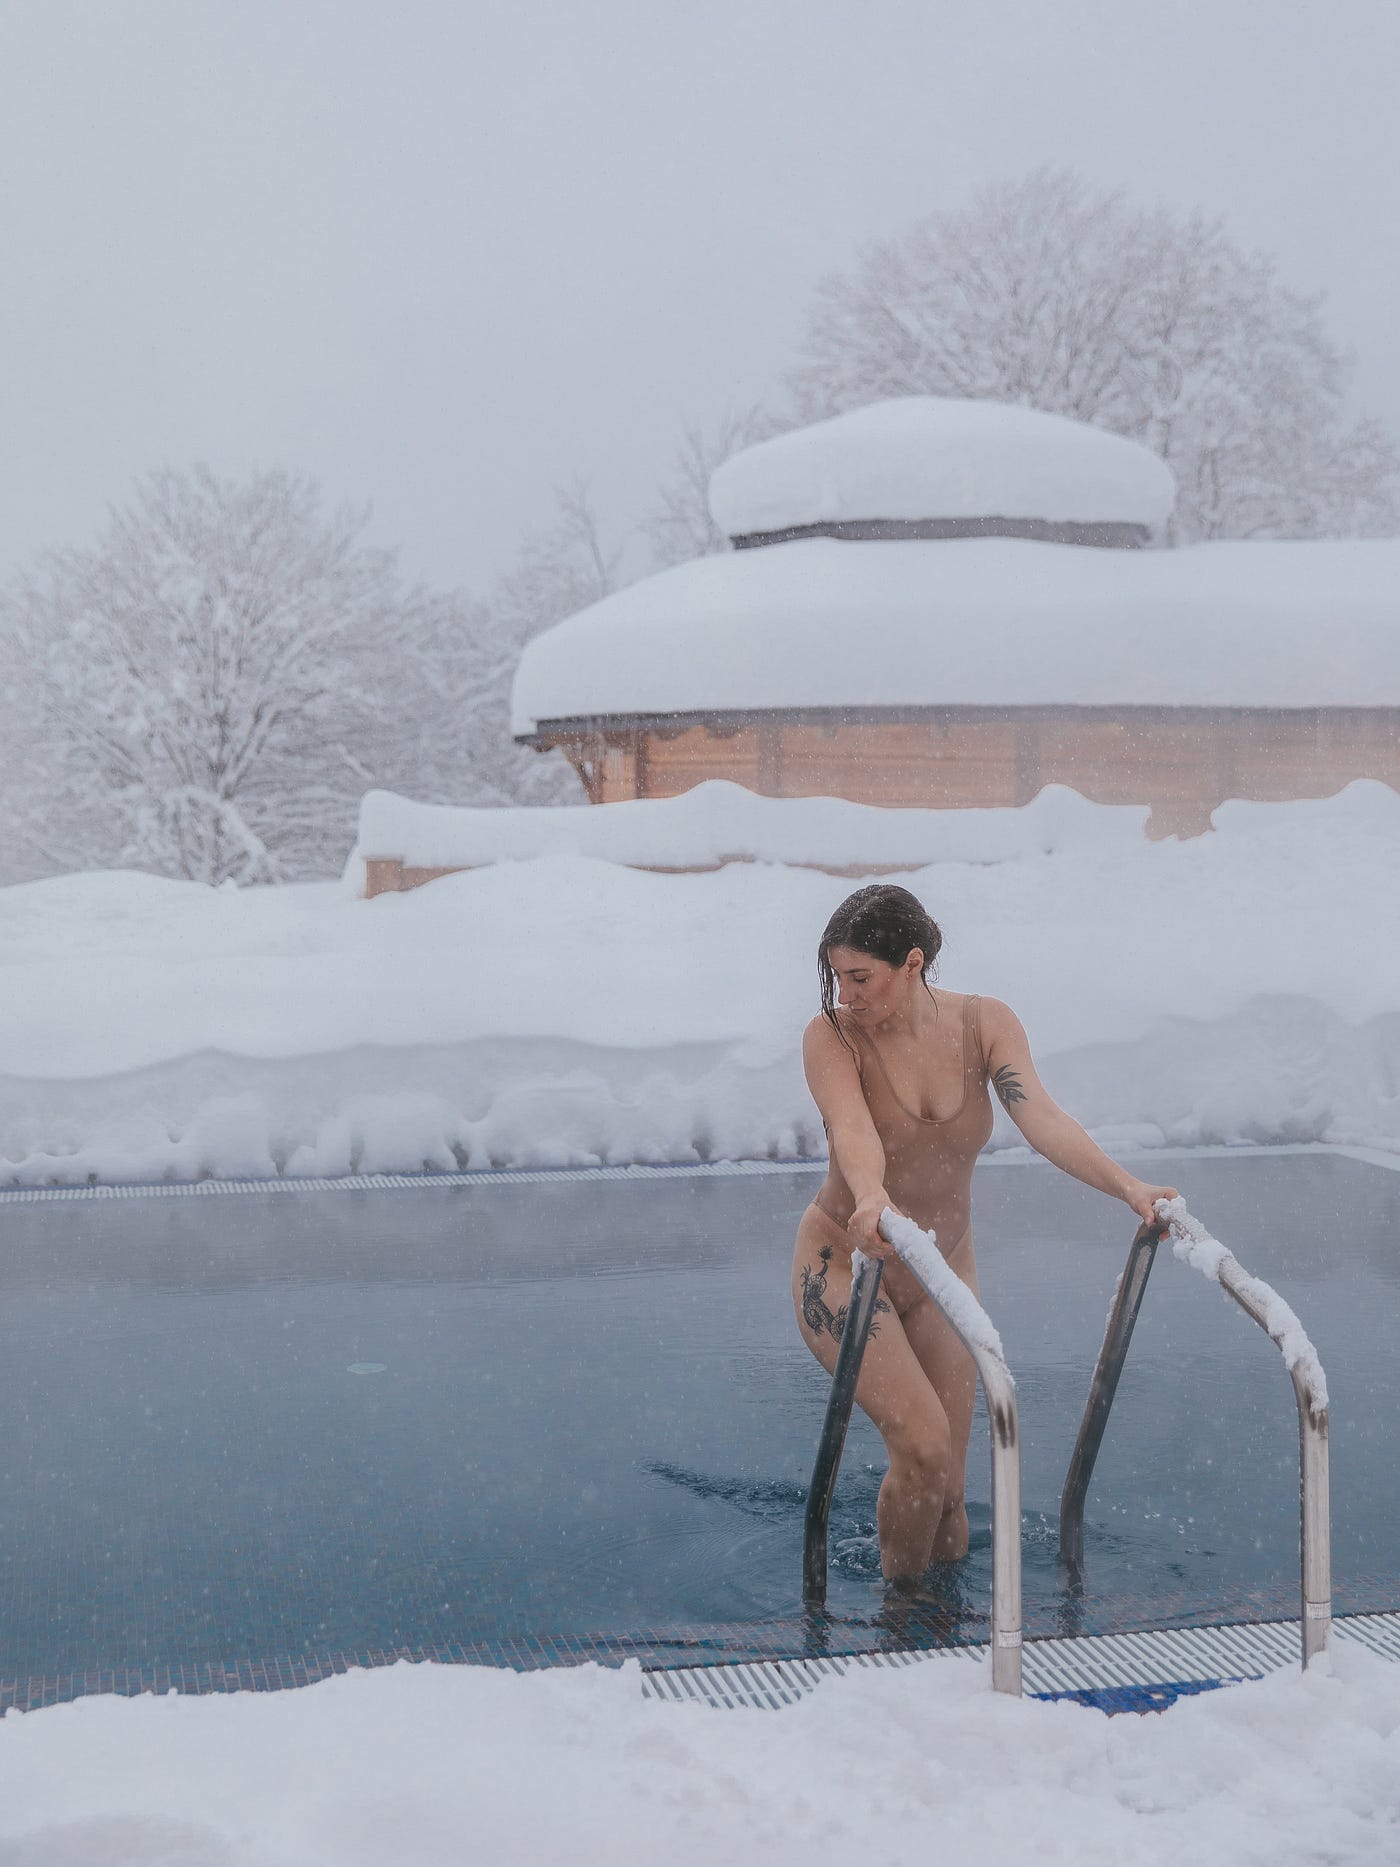 What I Learned From a Wim Hof Breathwork Class & Ice Plunge, by Candice  Galek